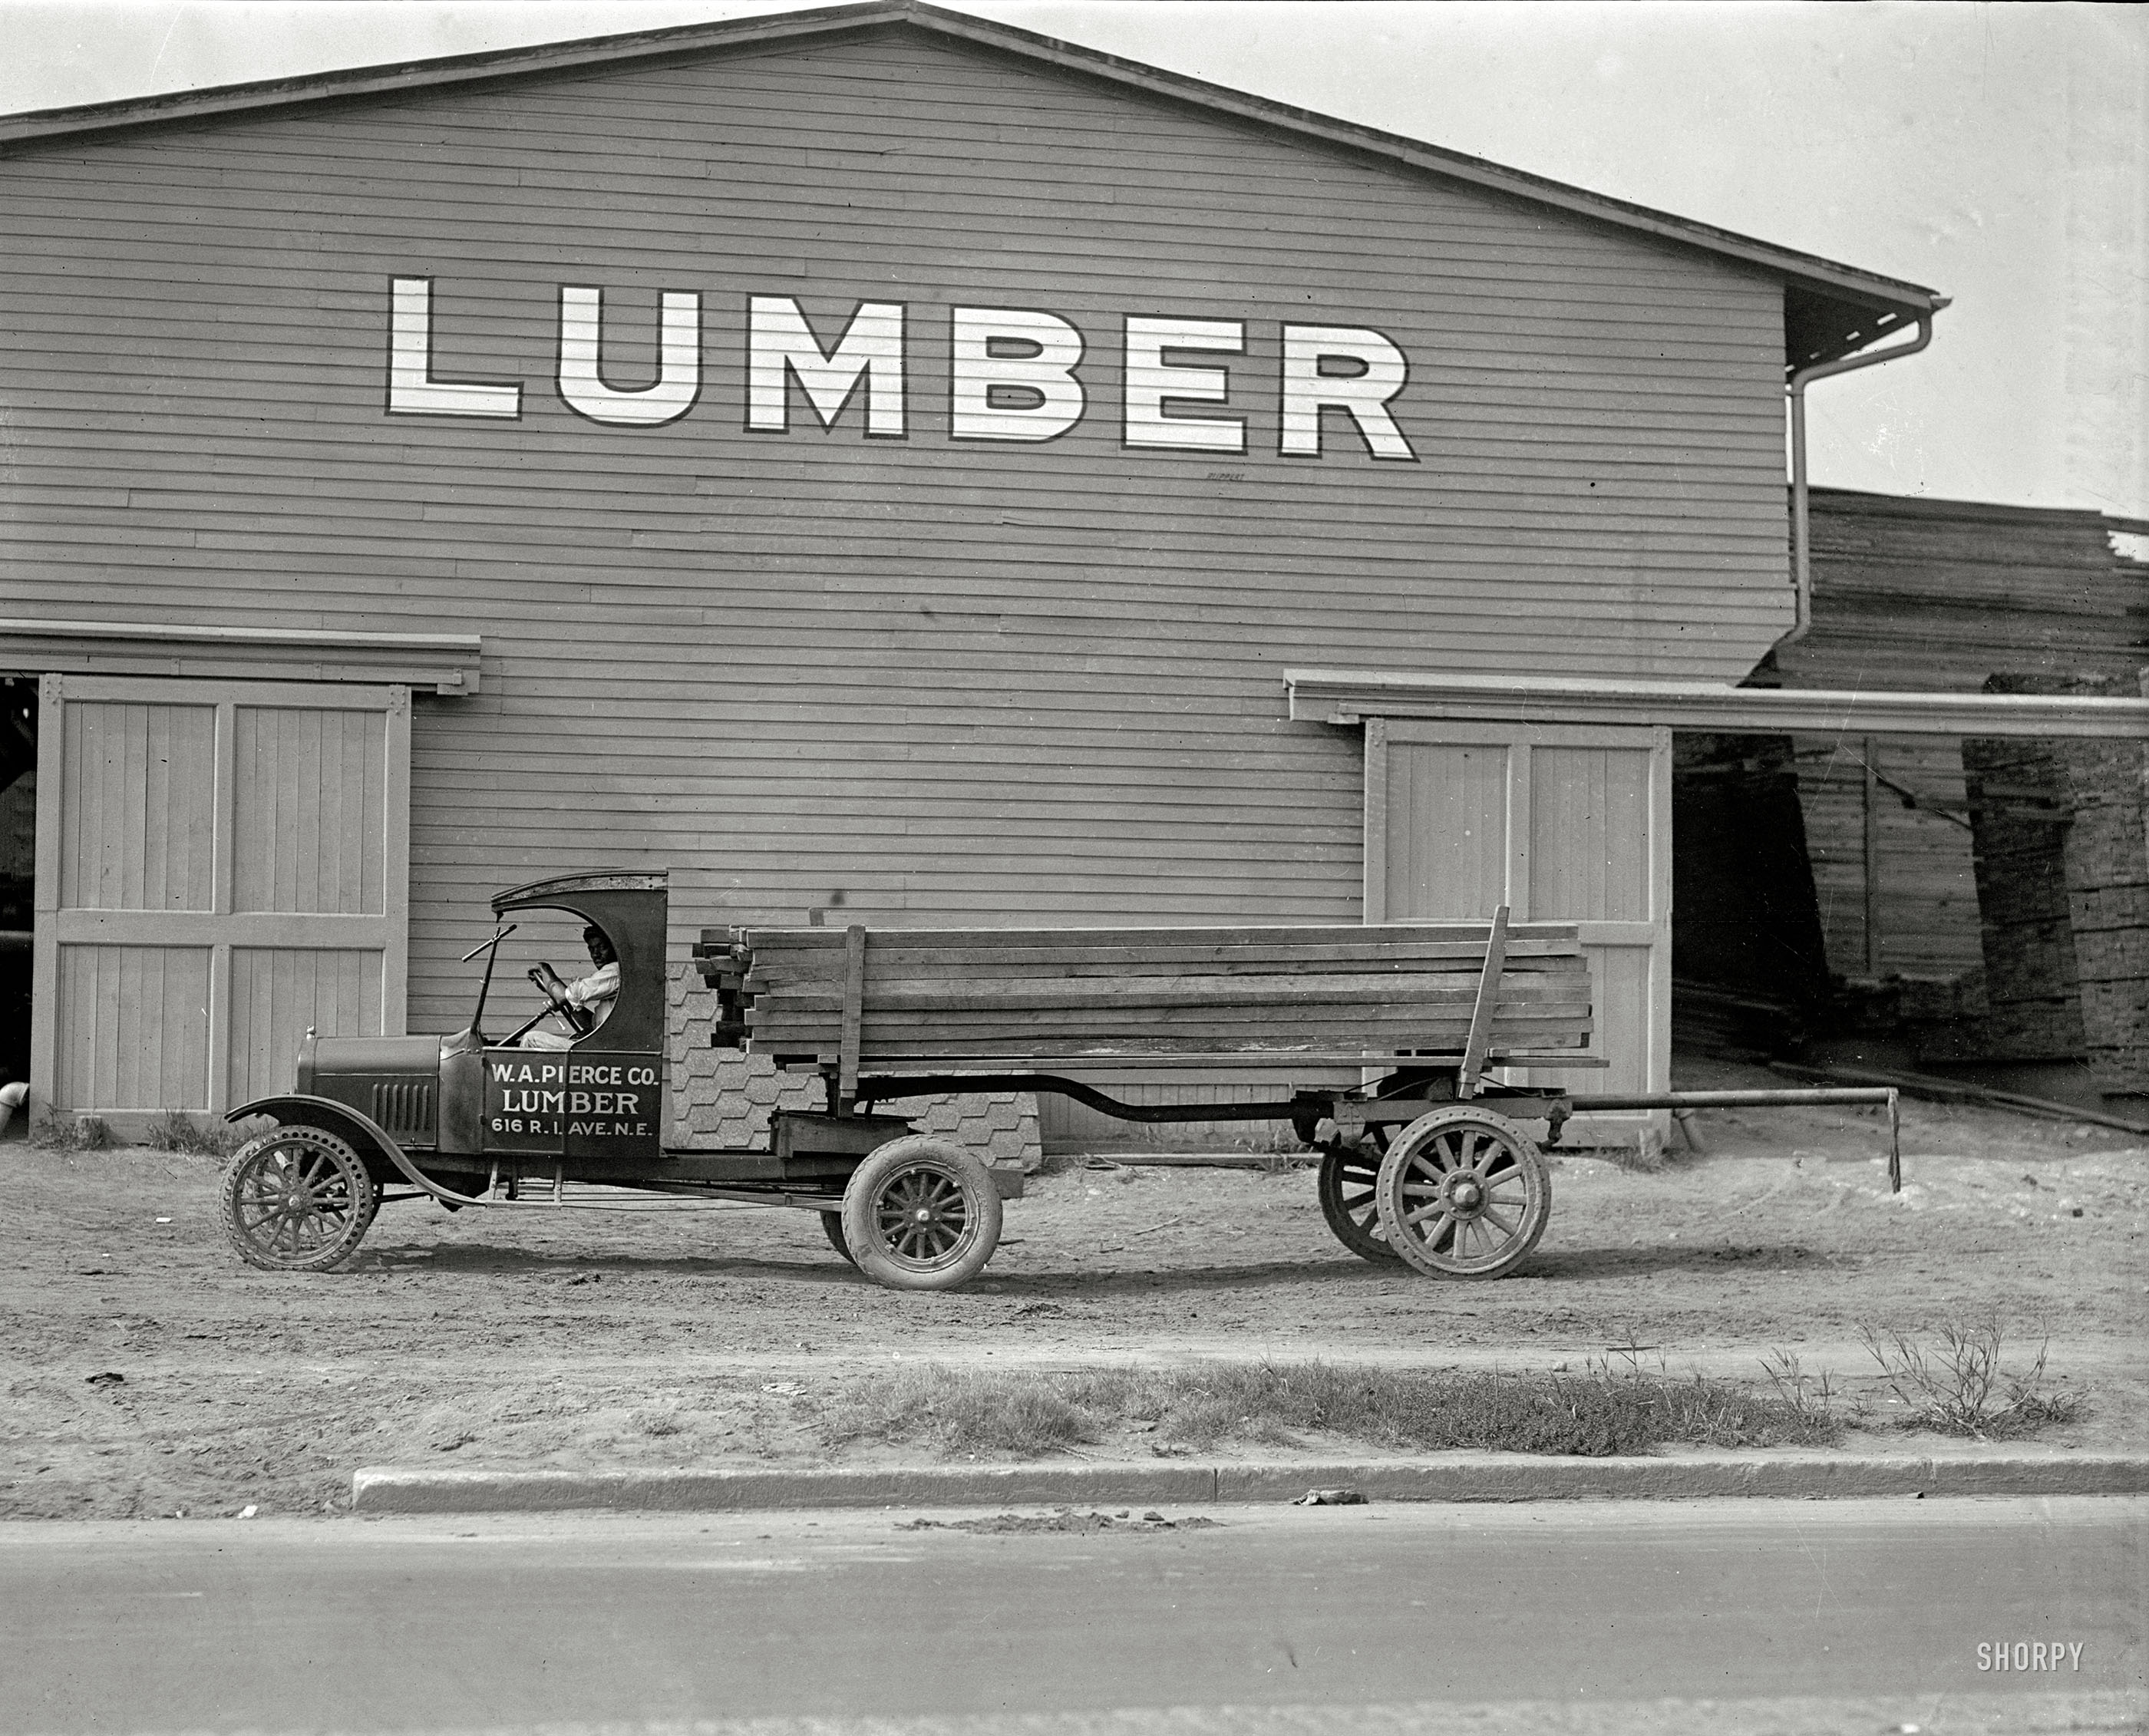 Washington, D.C., 1925. "Ford Motor Co. -- Pierce Lumber." An interesting mix of solid and pneumatic tires. National Photo glass negative. View full size.